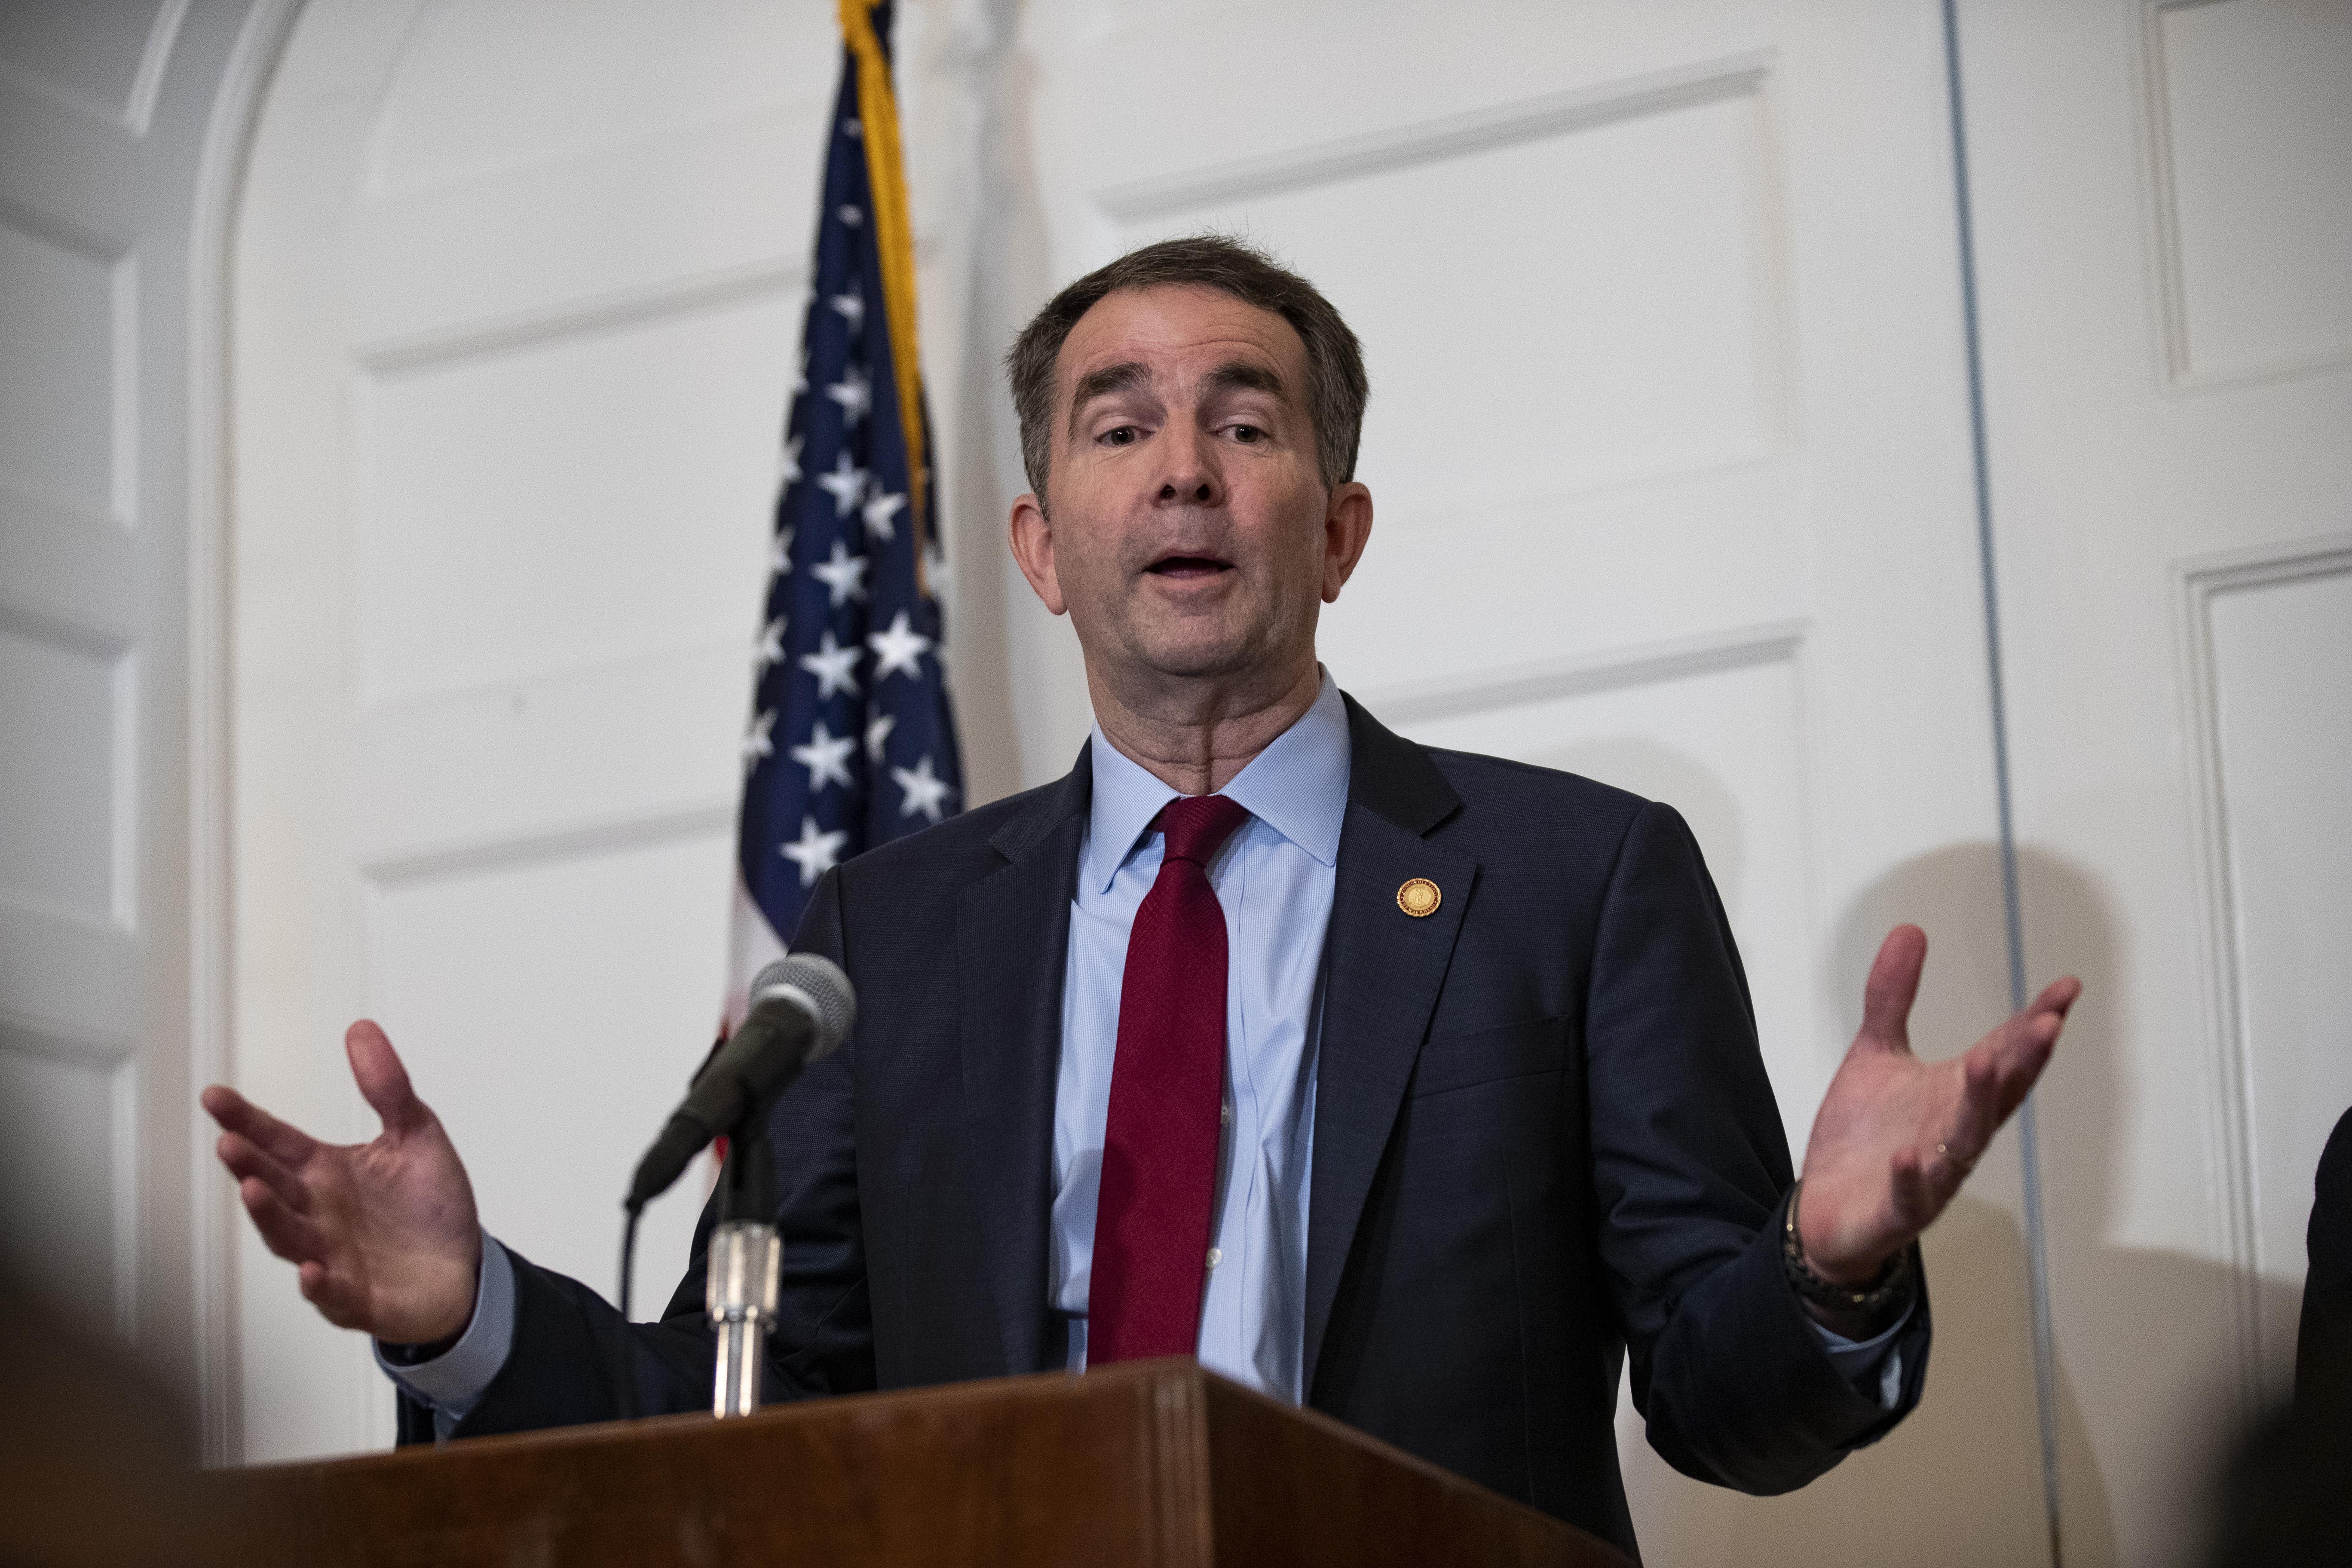 Virginia Gov. Ralph Northam speaks with reporters at a press conference at the governor’s mansion on Saturday.